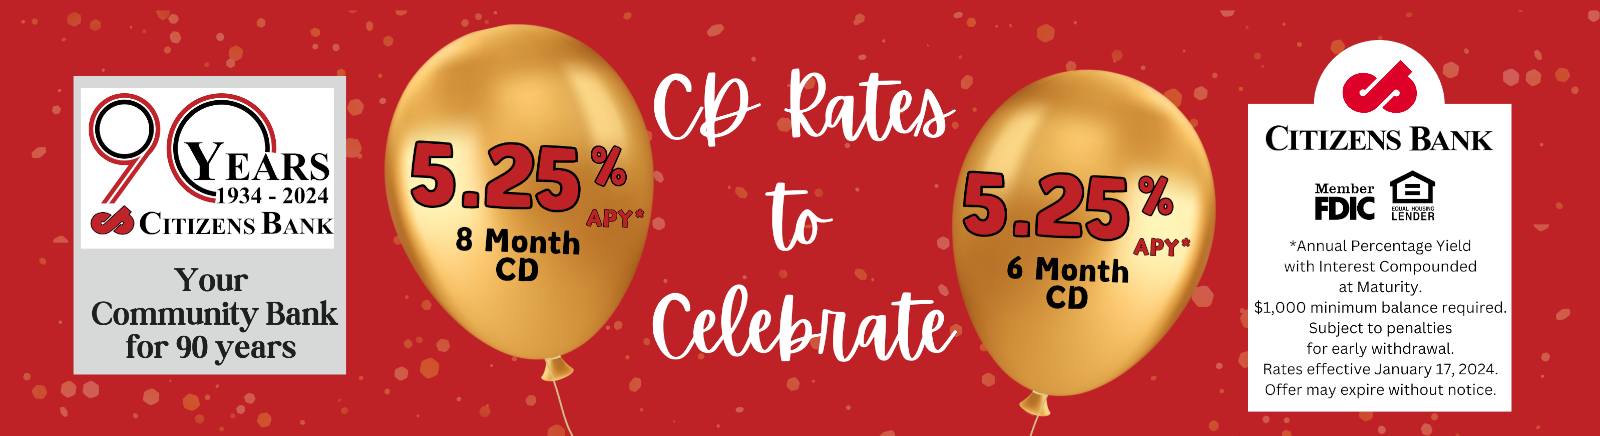 90 Years 1934-2024 Citizens Bank Your Community Bank for 90 years 5.25% APY* 8 Month CD CD Rates to Celebrate 5.25% APY* 6 MONTHS CITIZENS BANK Member FDIC Equal Housing Lender *Annual Percentage Yield with Interest Componded at Maturity. $1,000 minimum balanced required. Subject to penalties to early withdrawl. Rates effective January 17, 2024. Offer may expire without notice.